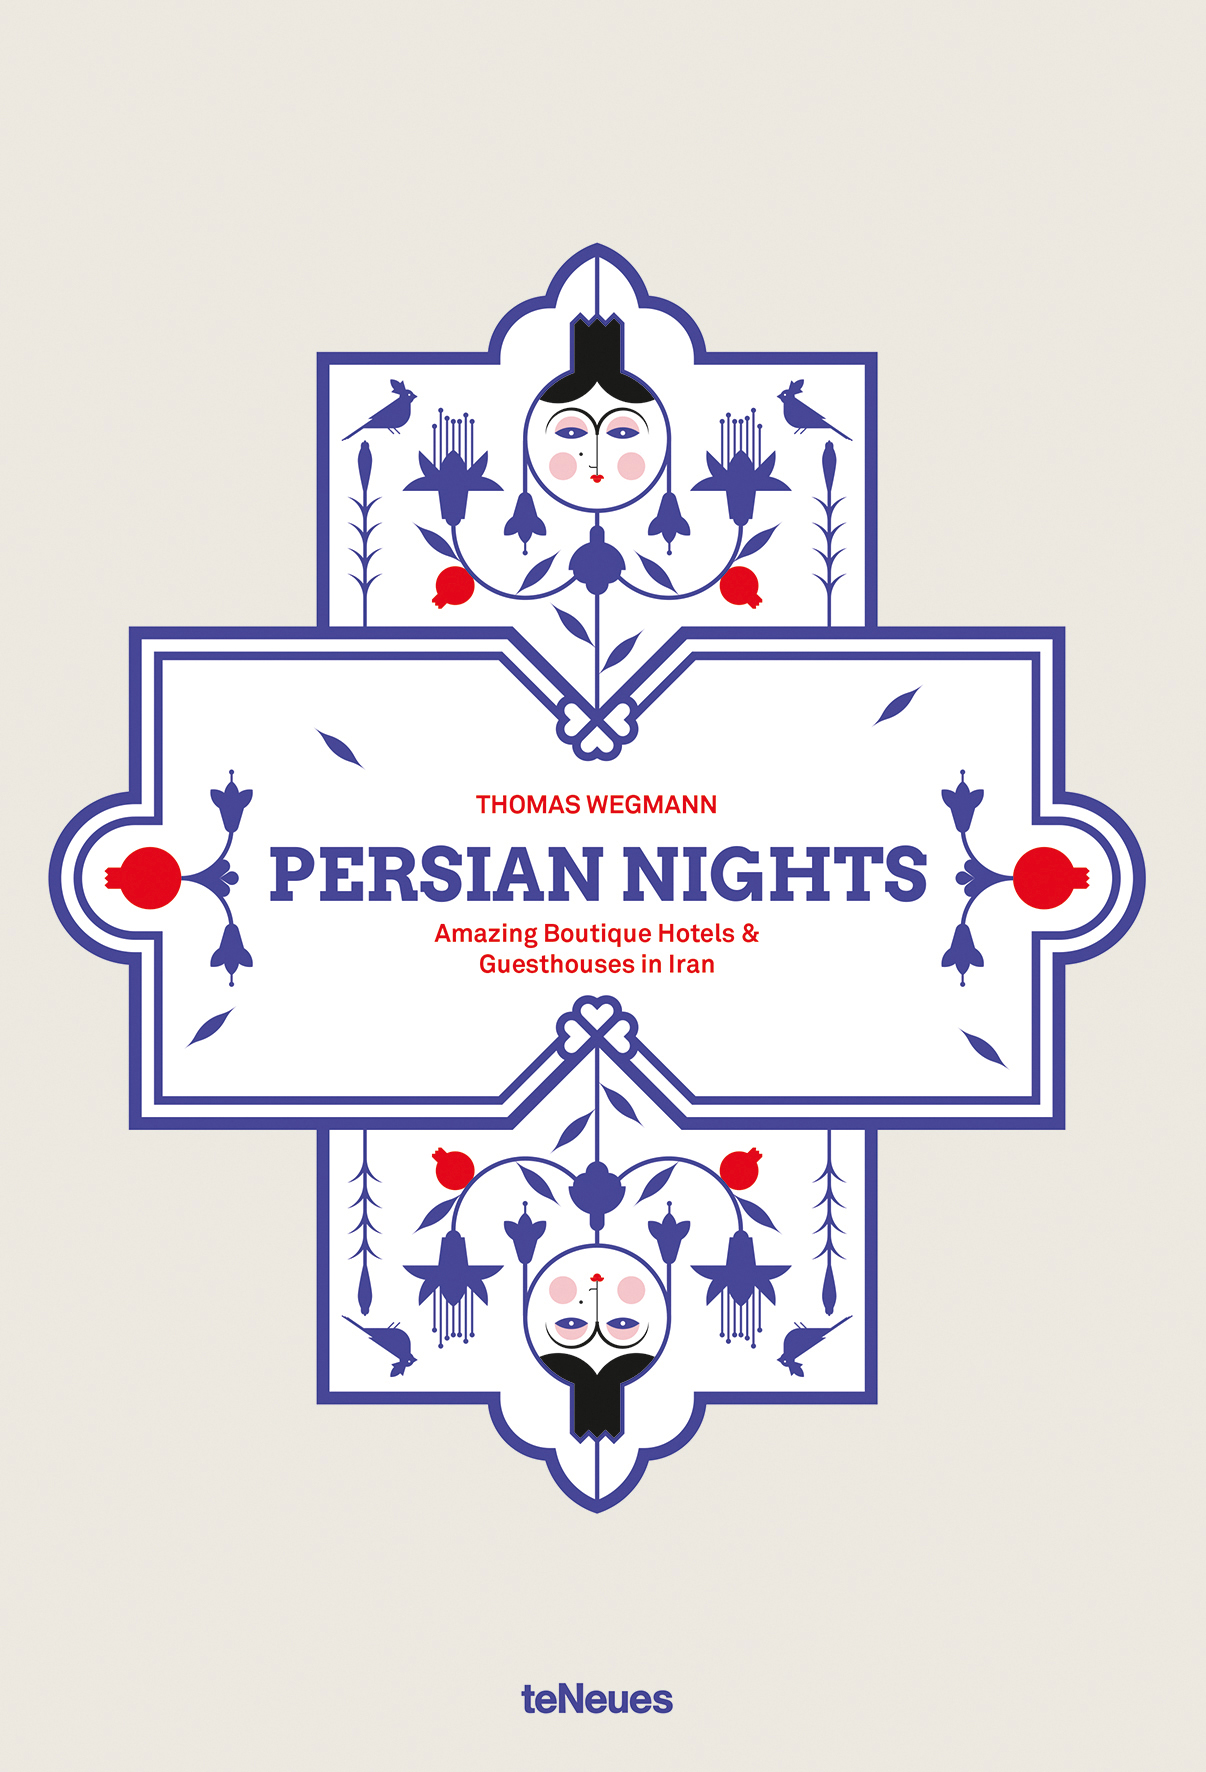 Persian Nights featured in the Daily Mail